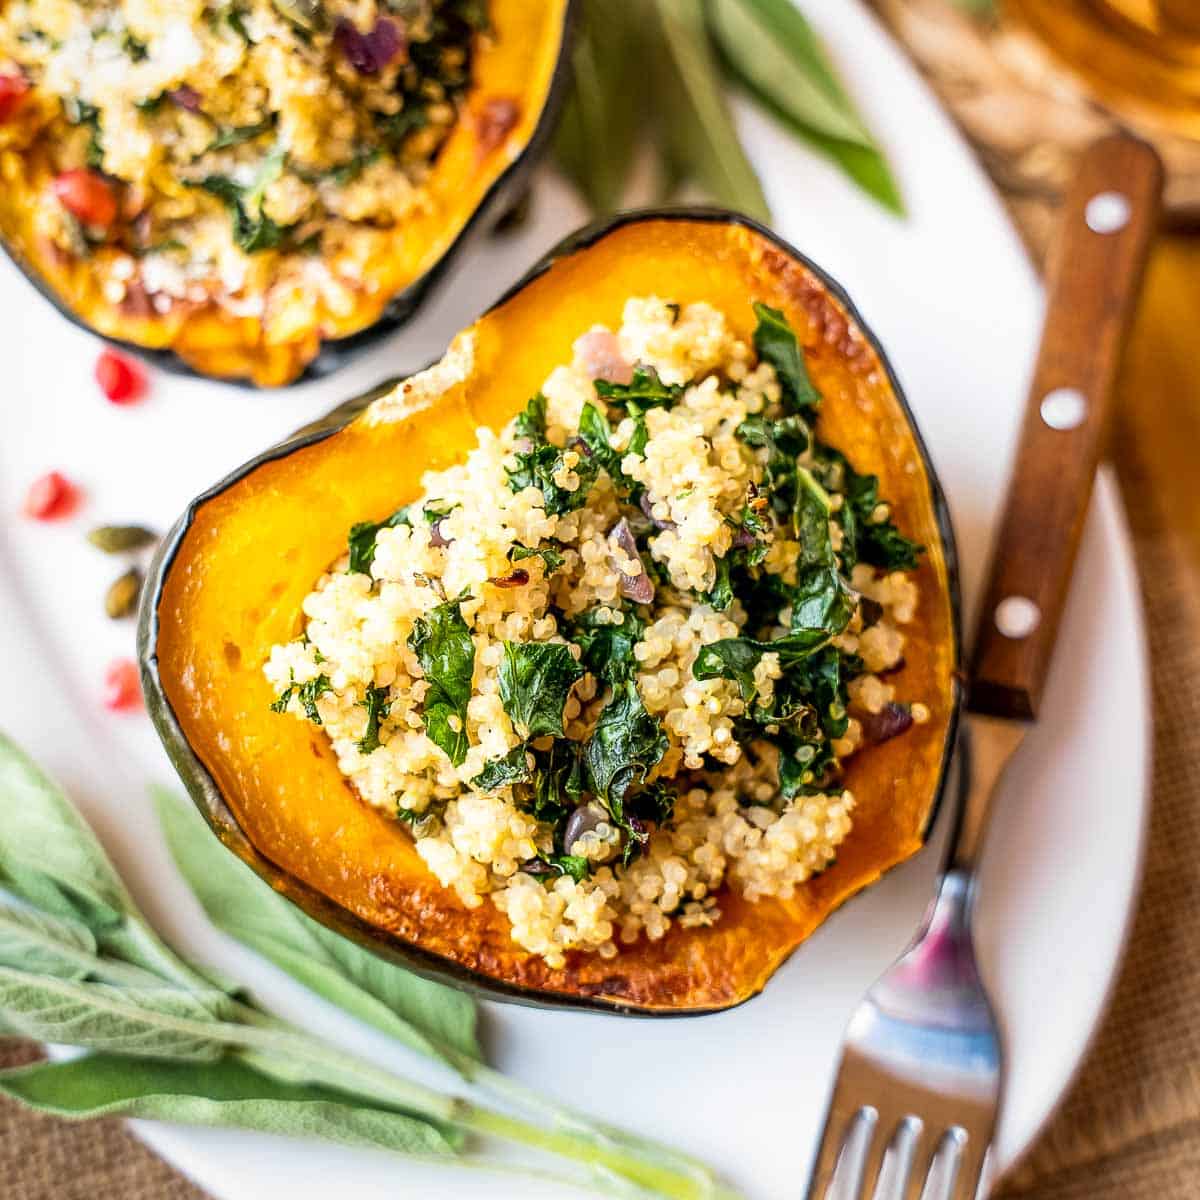 Overhead shot of two halves of an acorn squash filled with quinoa filling on a white oval plate with sage and a wooden fork on the side.